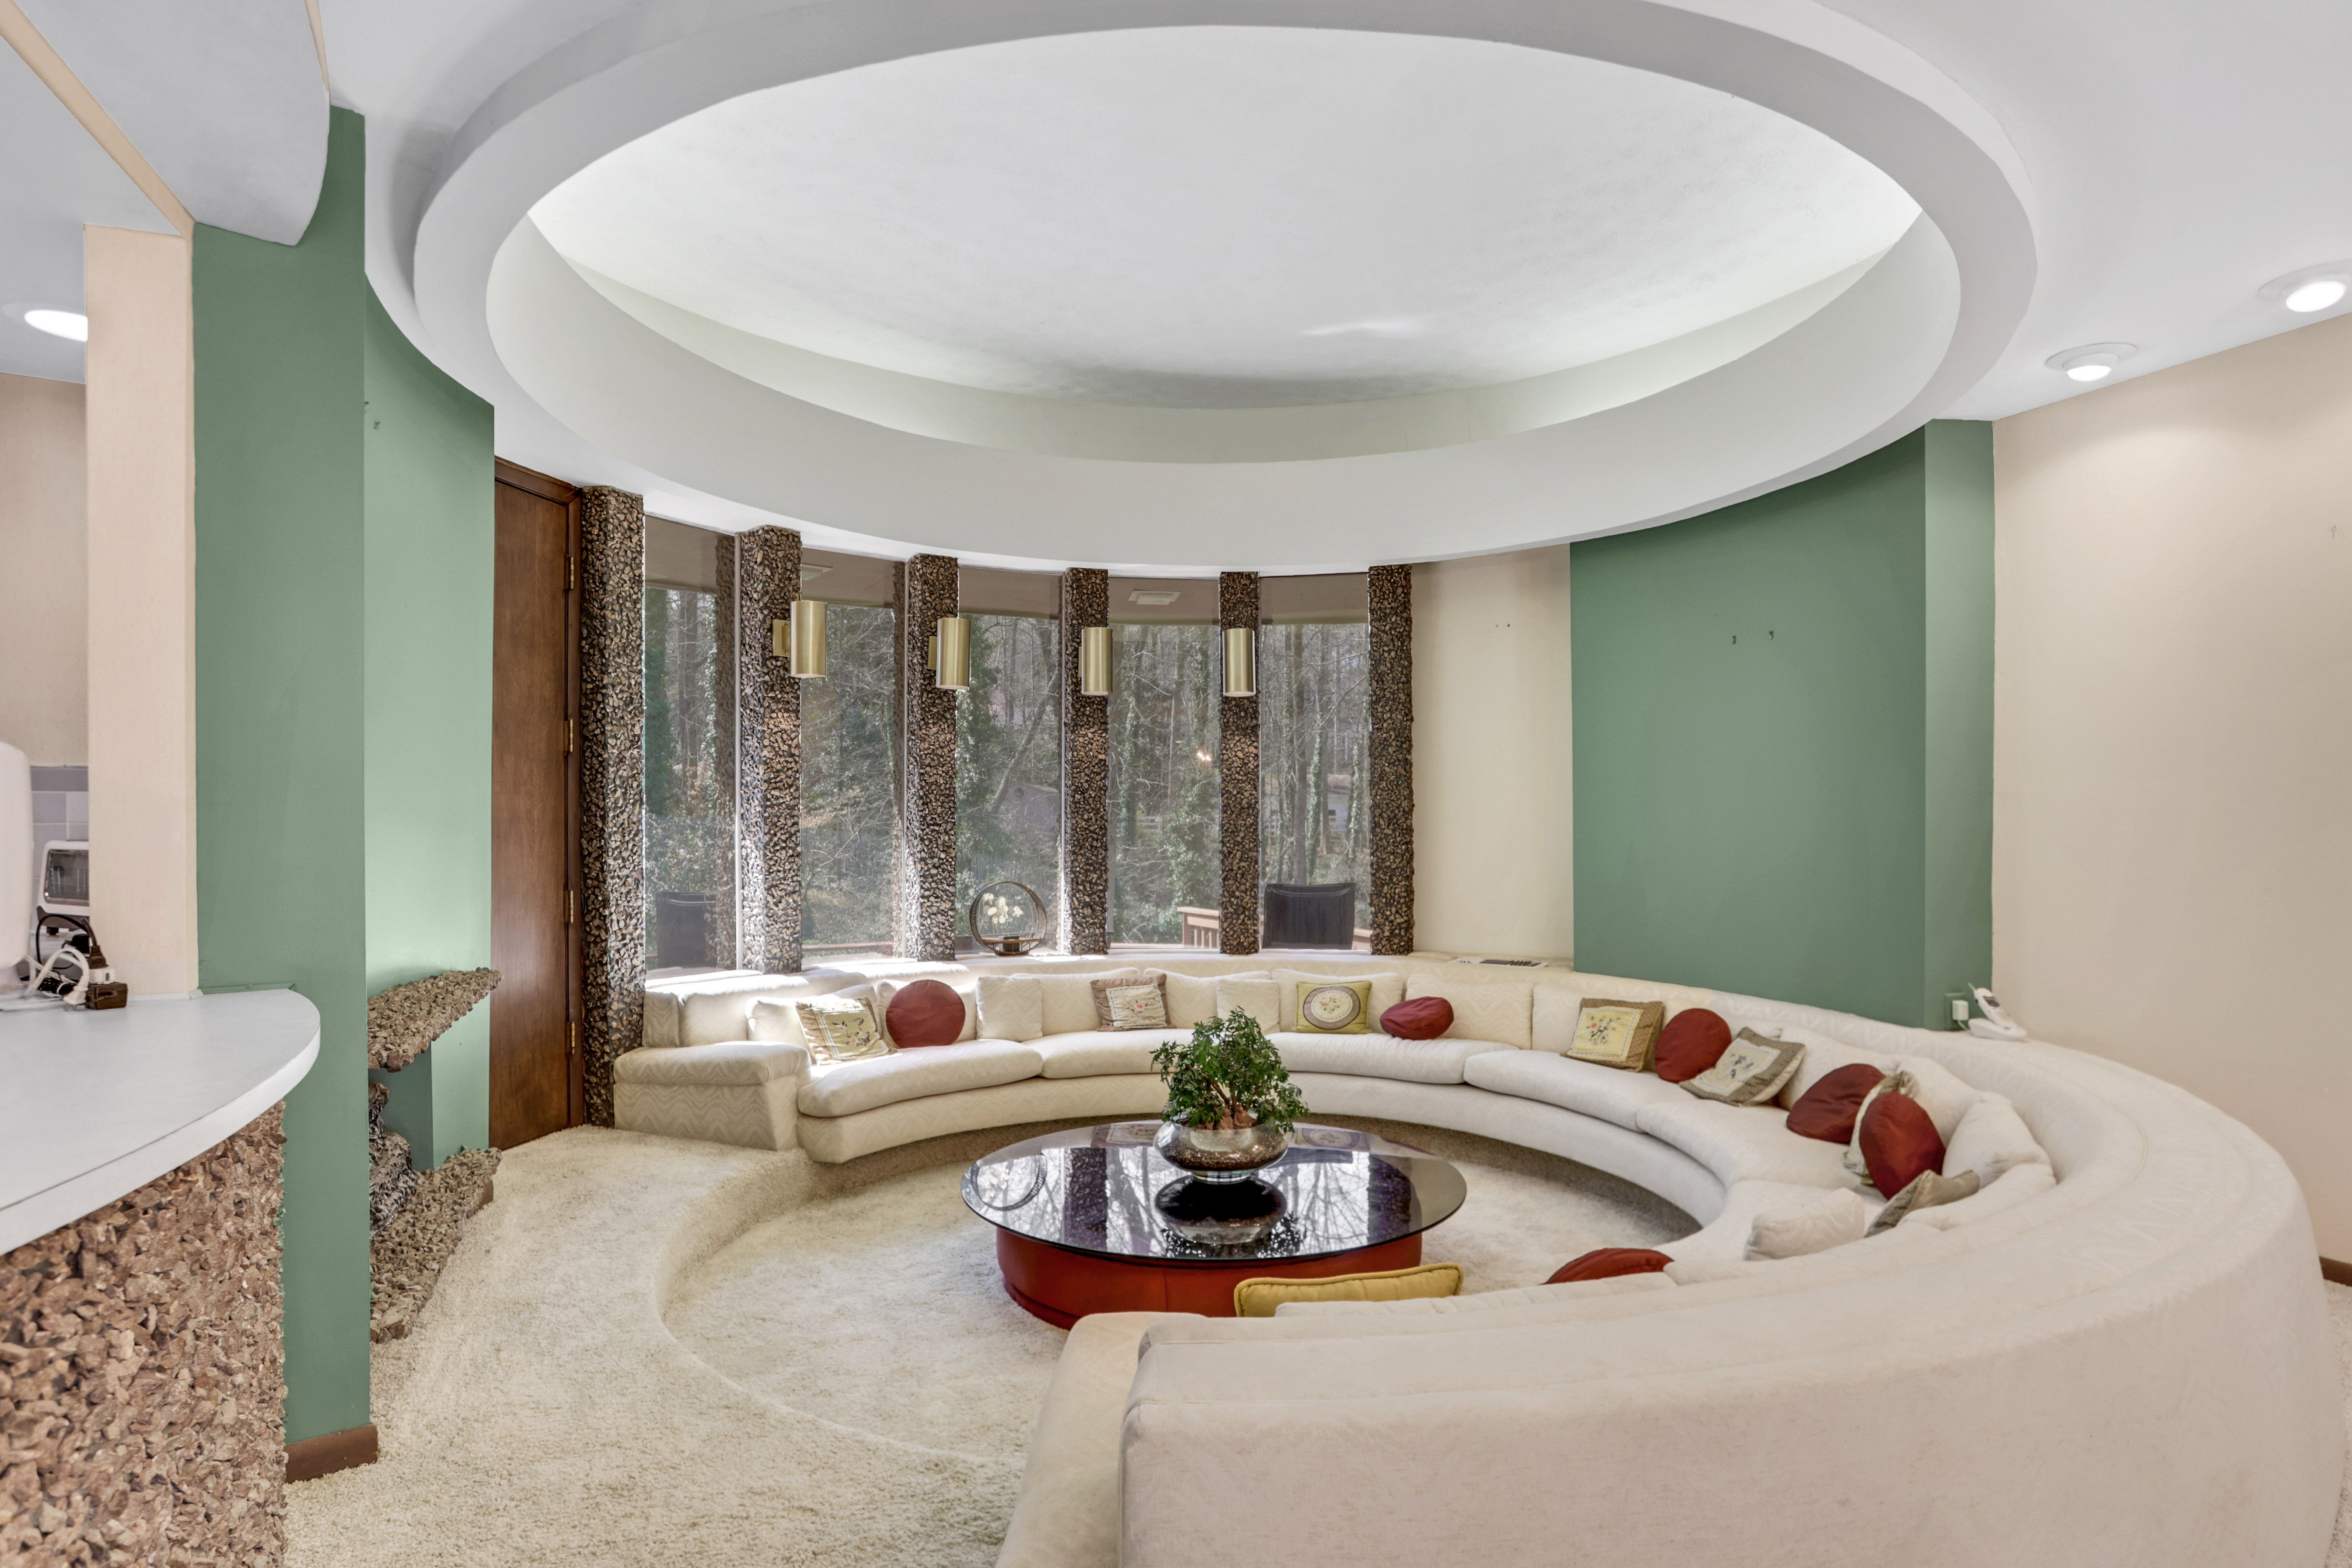 A conversation pit with a large circular ceiling feature overhead and aqua walls